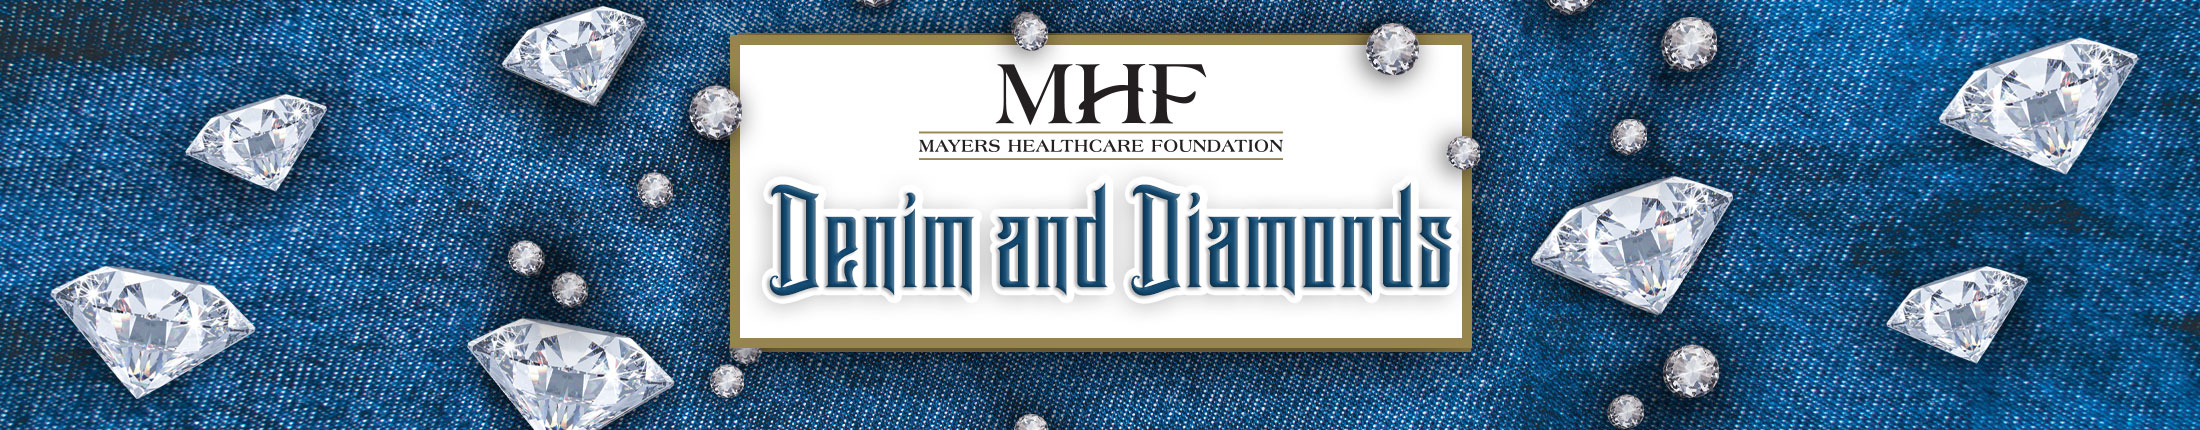 Banner Graphic of blue jean background with Diamonds scattered around of all sizes.
Banner says:

MHF
MAYERS HEALTHCARE FOUNDATION
Denim and Diamonds